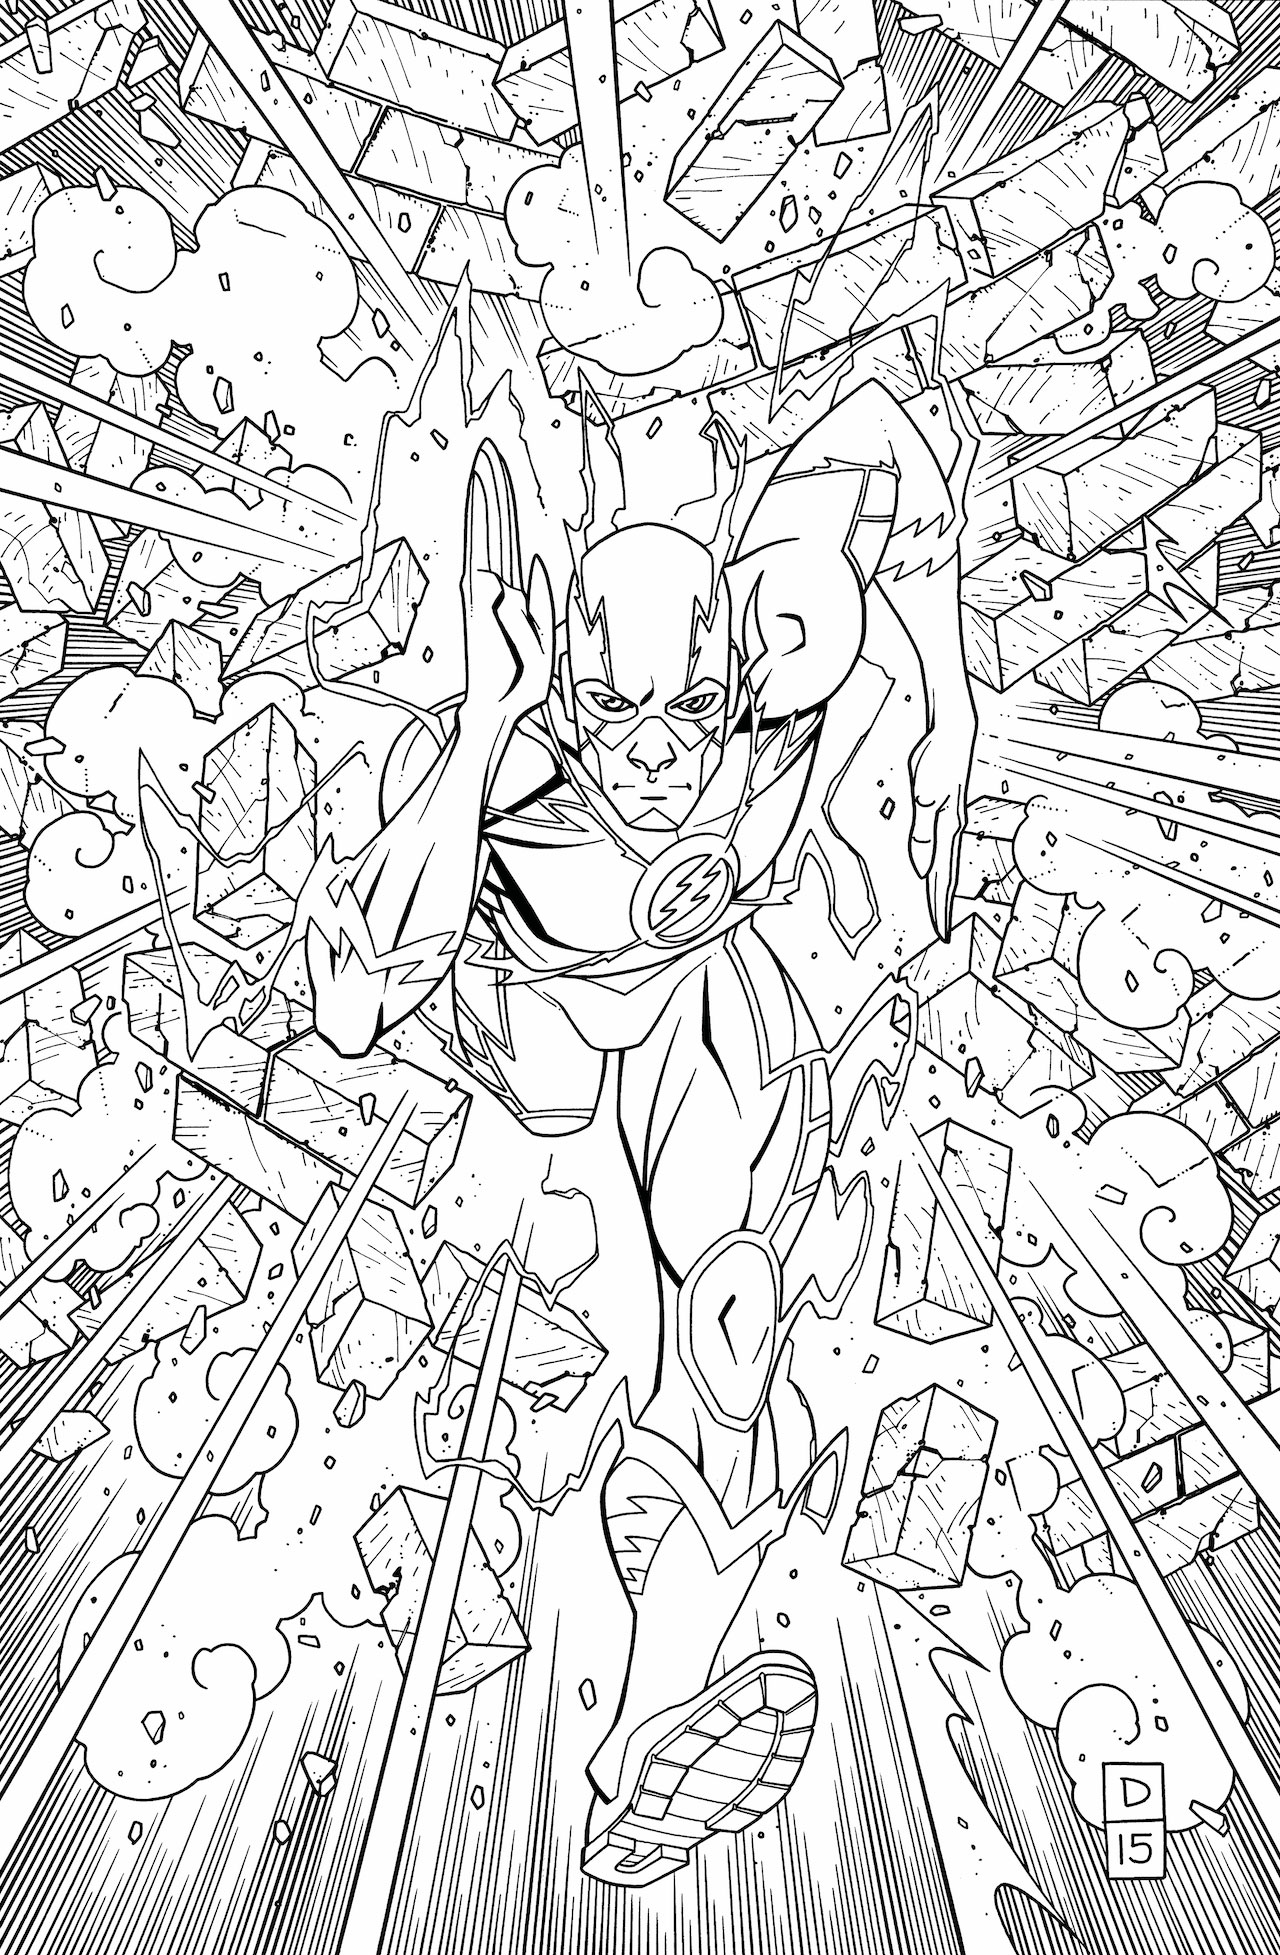 THE FLASH: AN ADULT COLORING BOOK TP